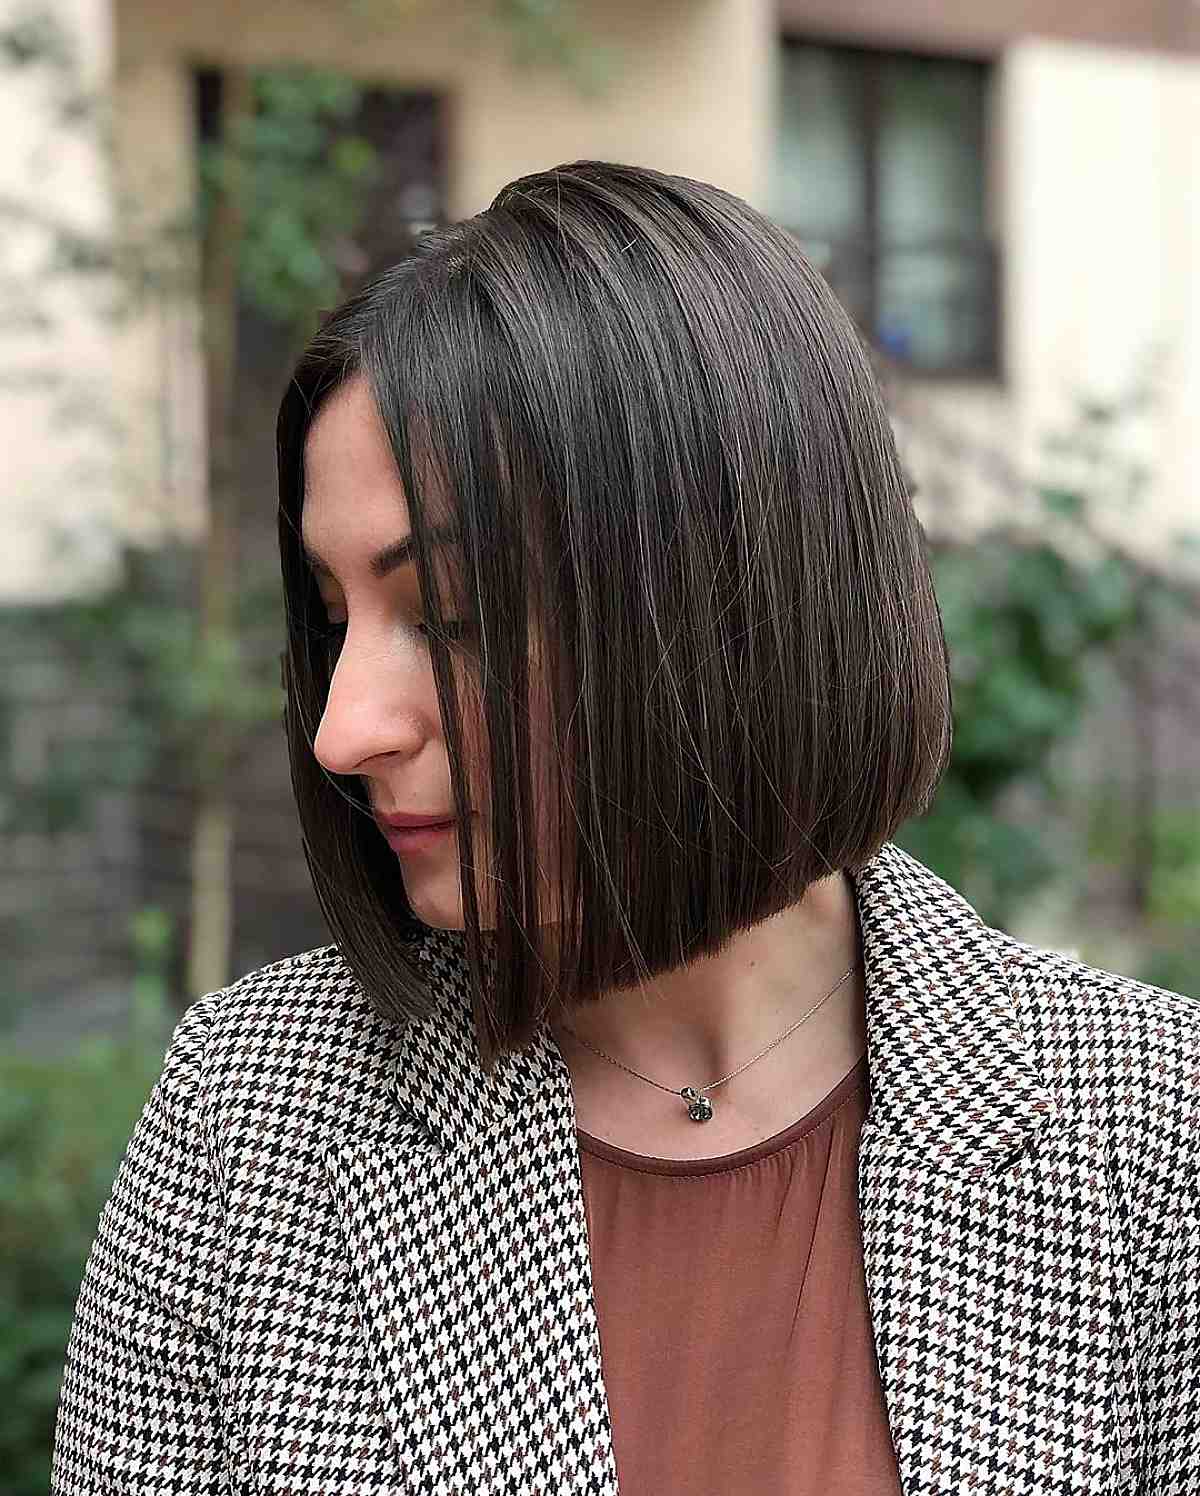 52 Best Bob Haircut Trends To Try in 2023 : Brunette Bob + Bangs